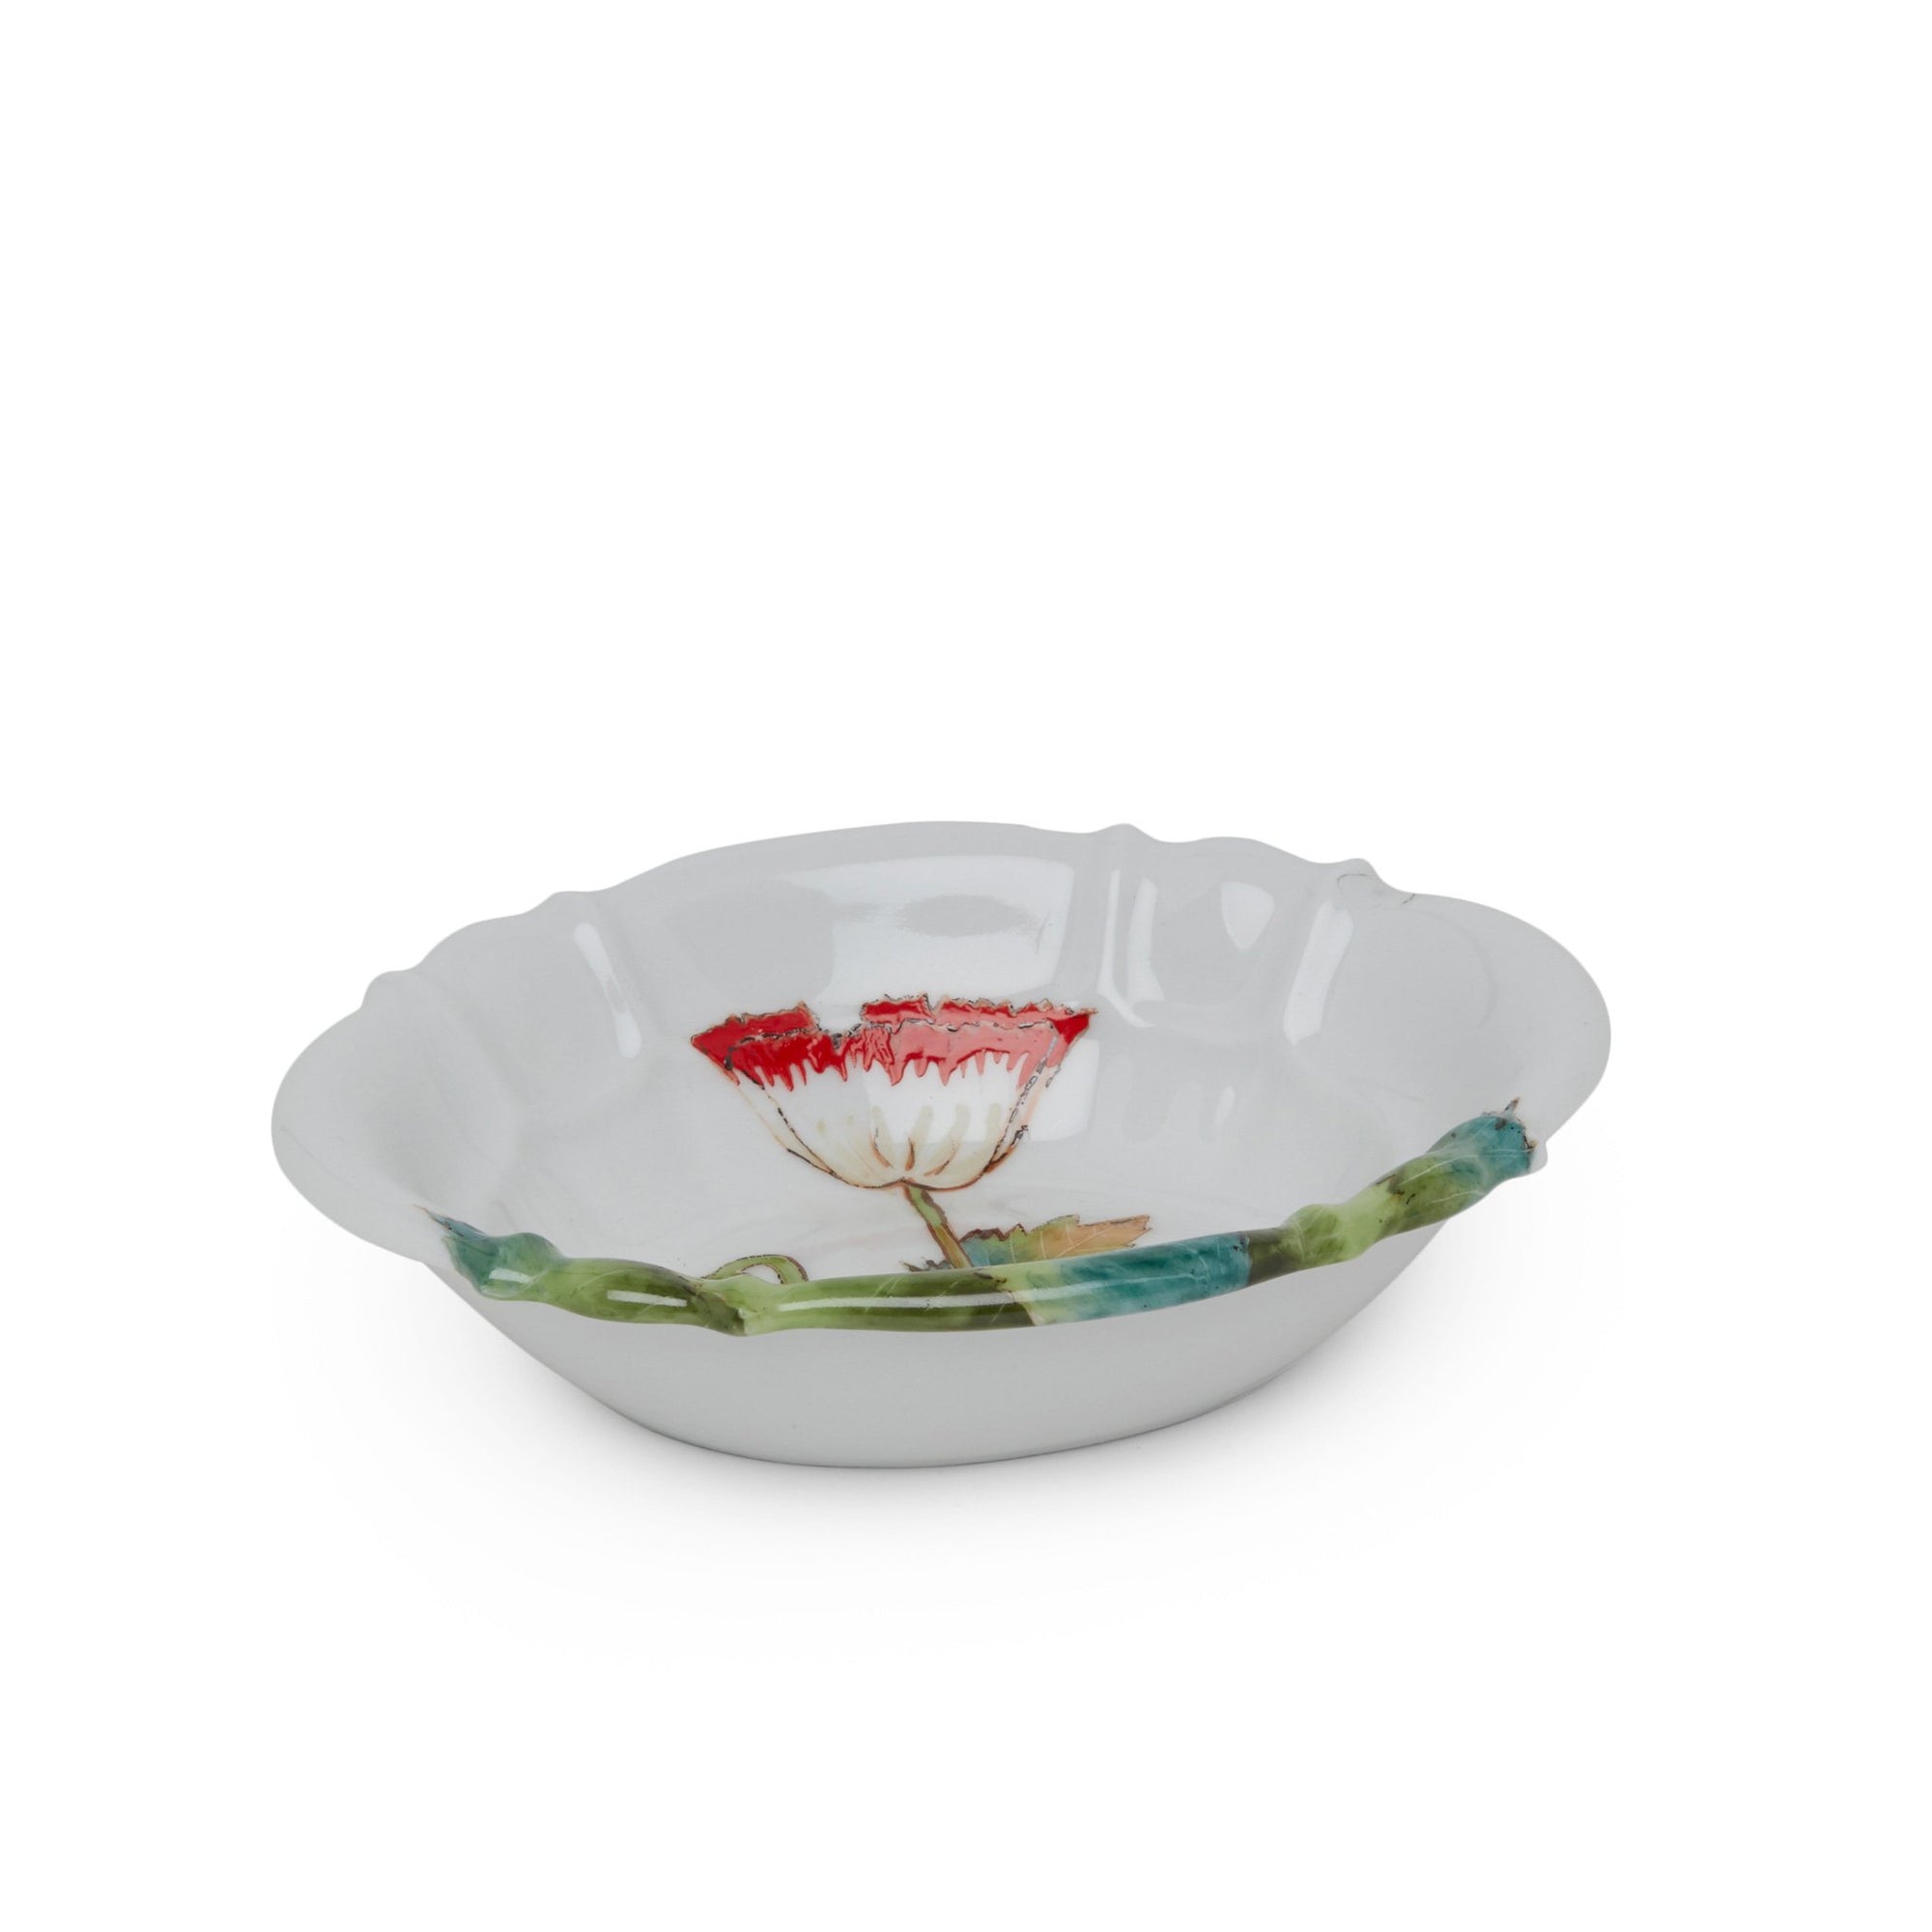 3362-69PP-WH Sherle Wagner International Ceramic Soap Dish with Poppies on White